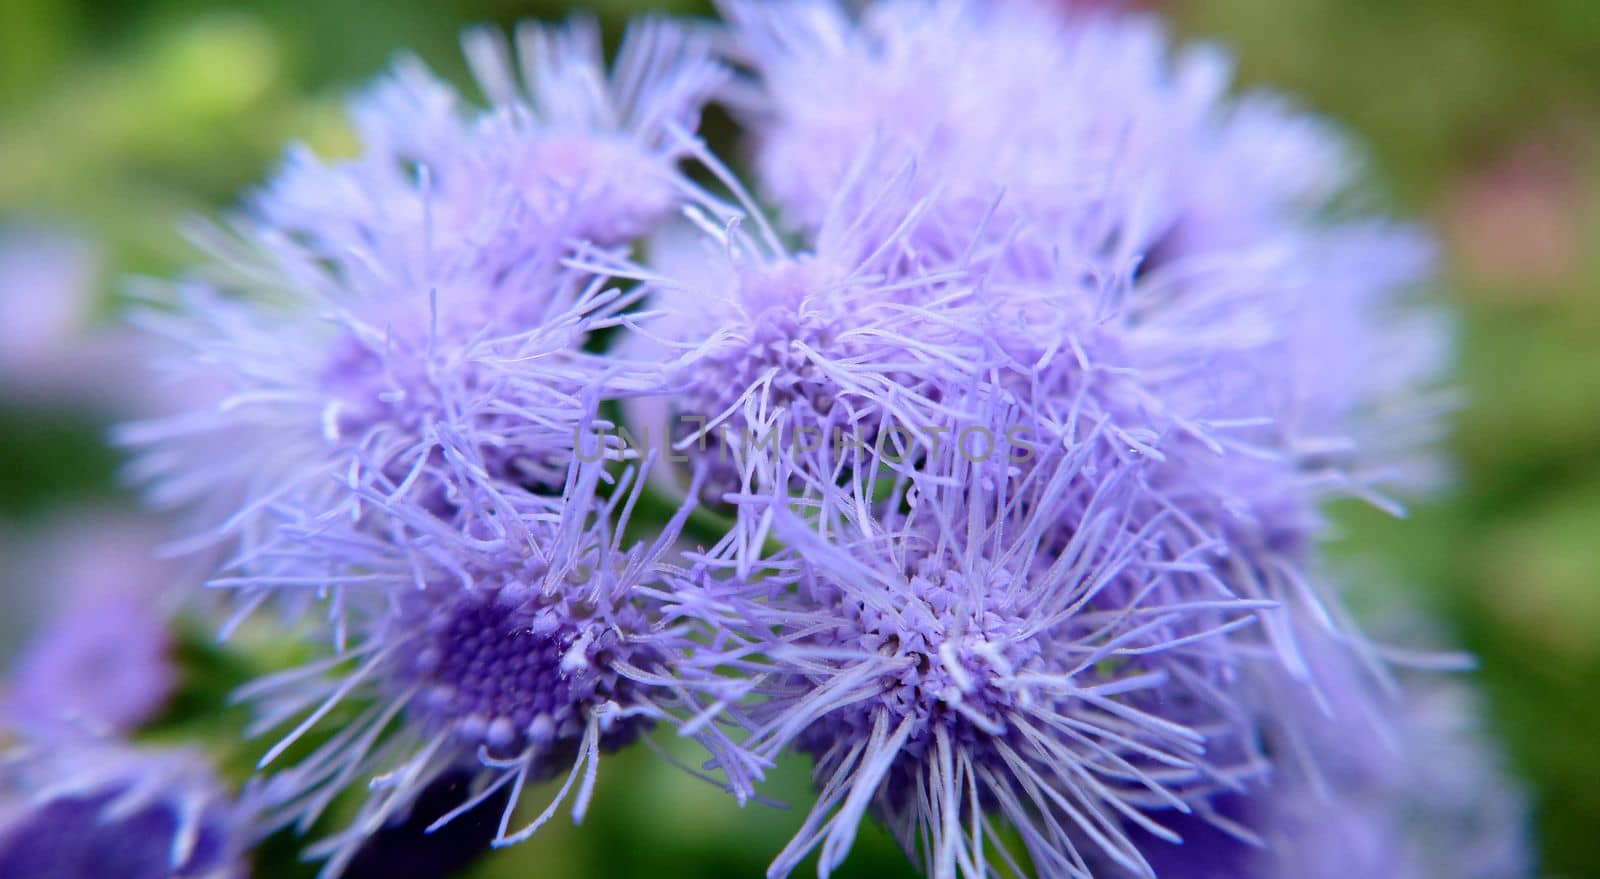 A group of fluffy blue flowers Ageratum houstonianum outdoors.Macrophotography.Texture or background.Selective focus